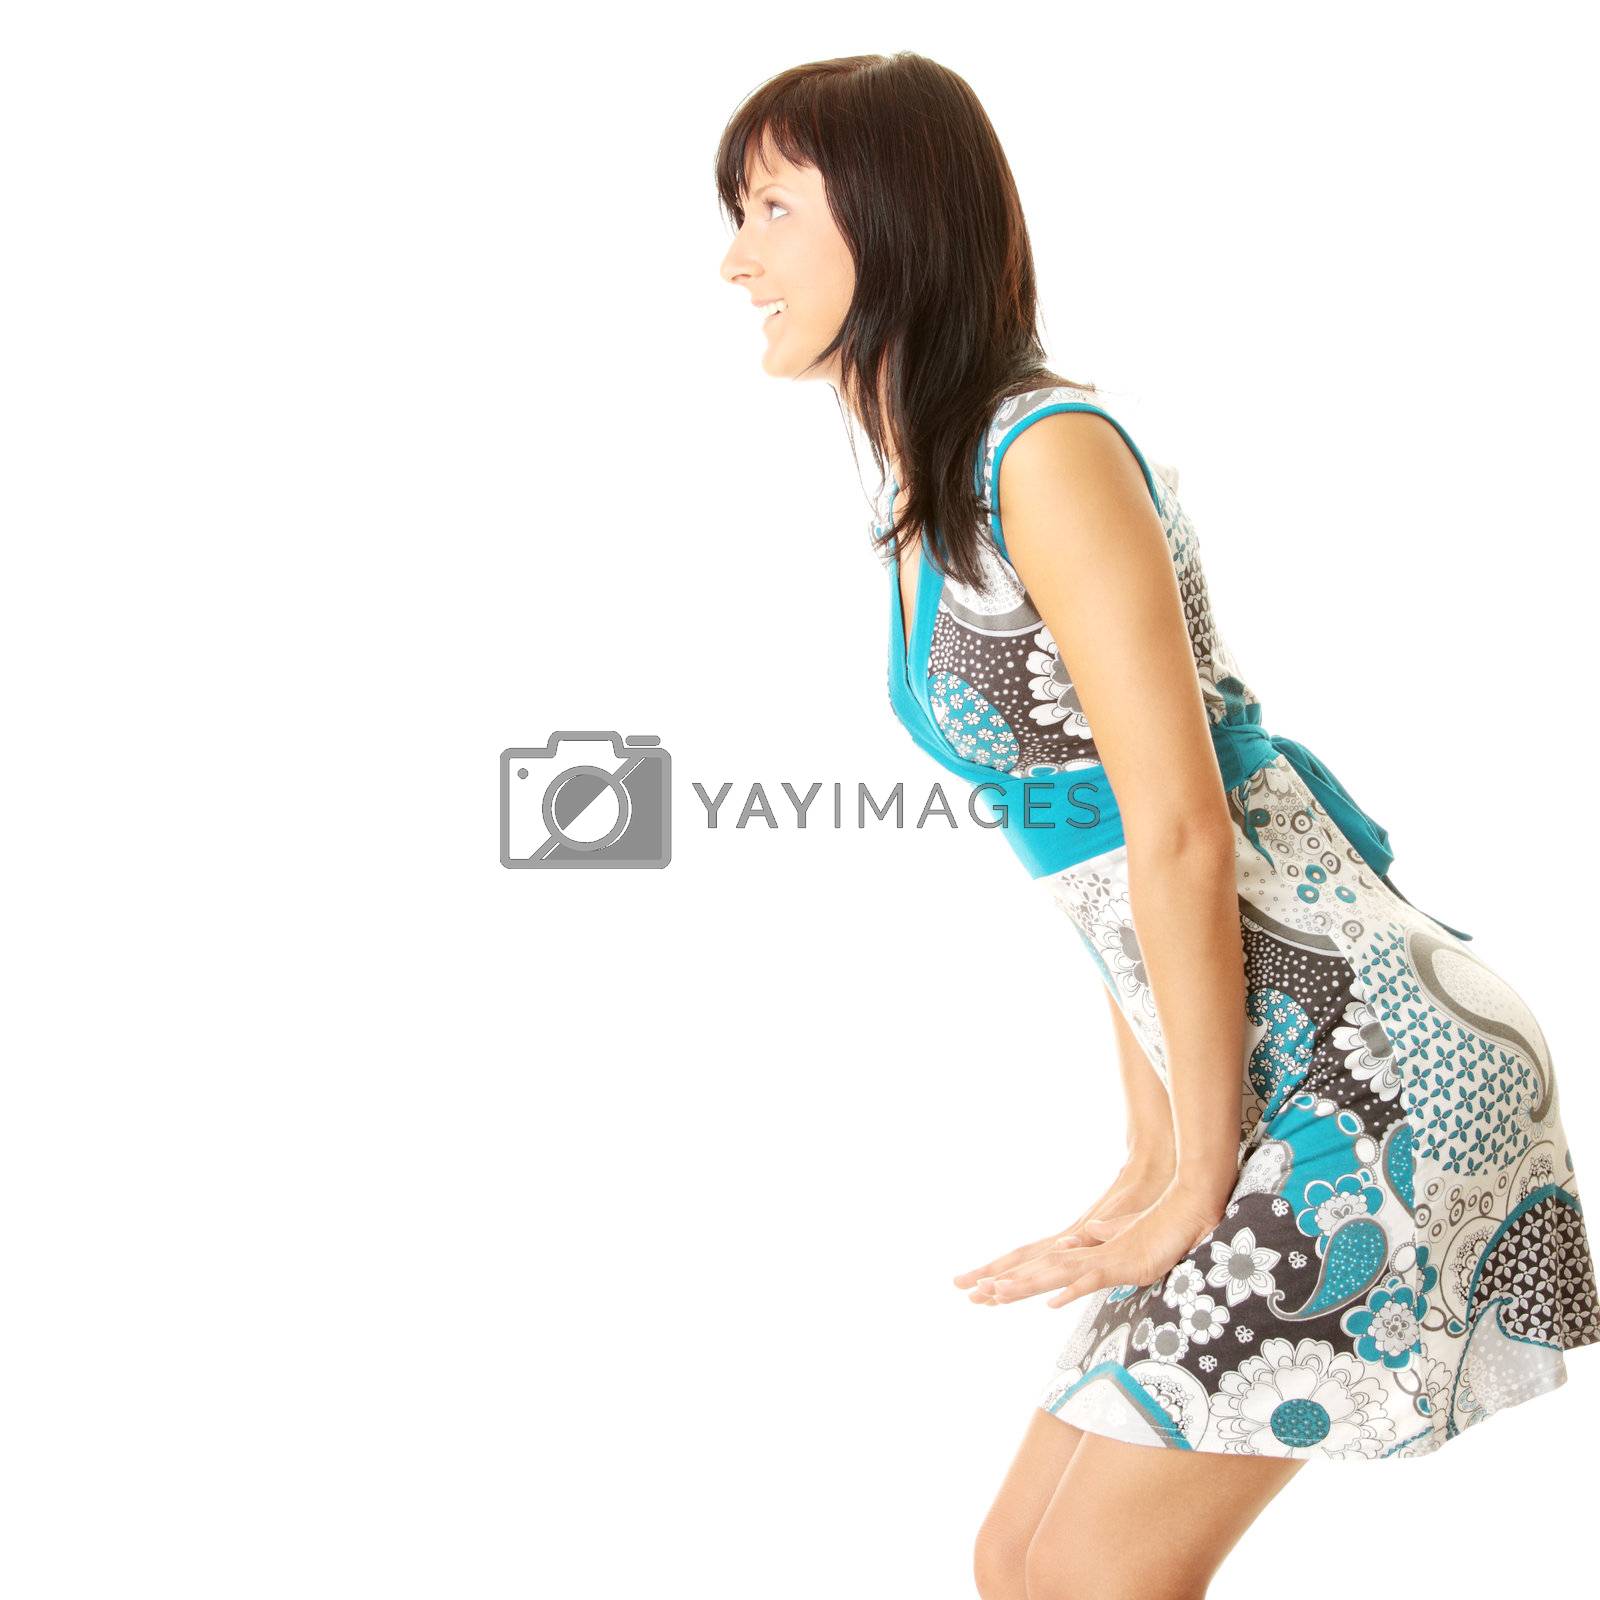 Royalty free image of Young adult girl rejoicing in new dress by BDS